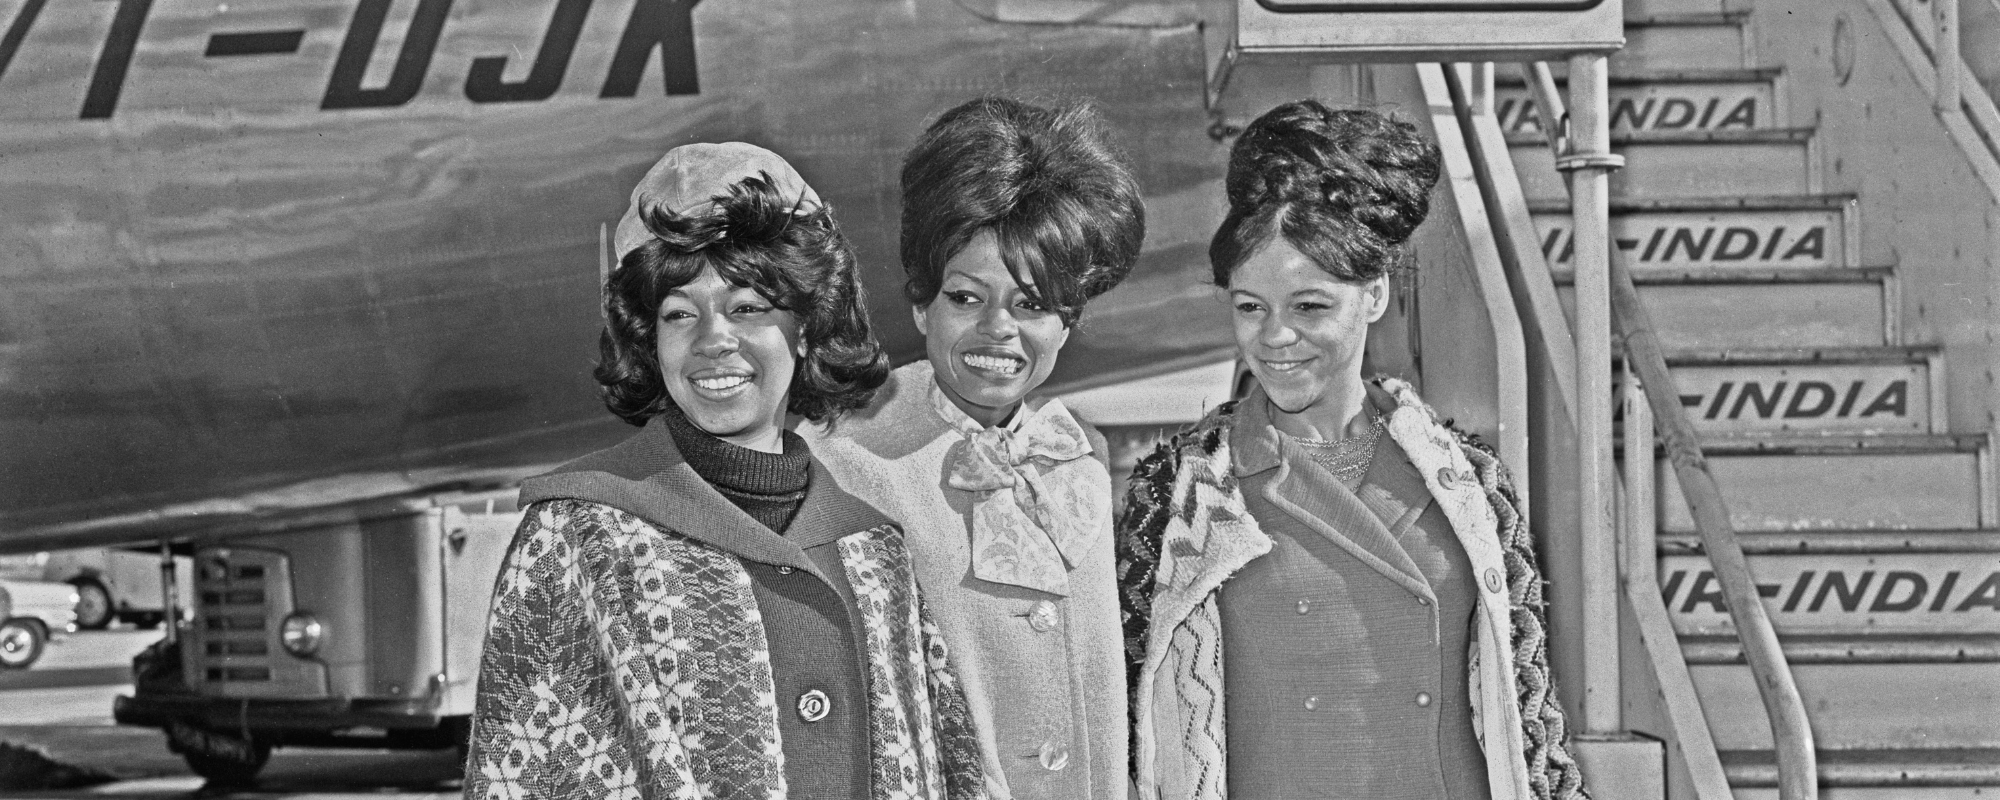 The Perhaps Not-Quite-So-Innocent True Meaning Behind “Stop! In the Name of Love” by The Supremes